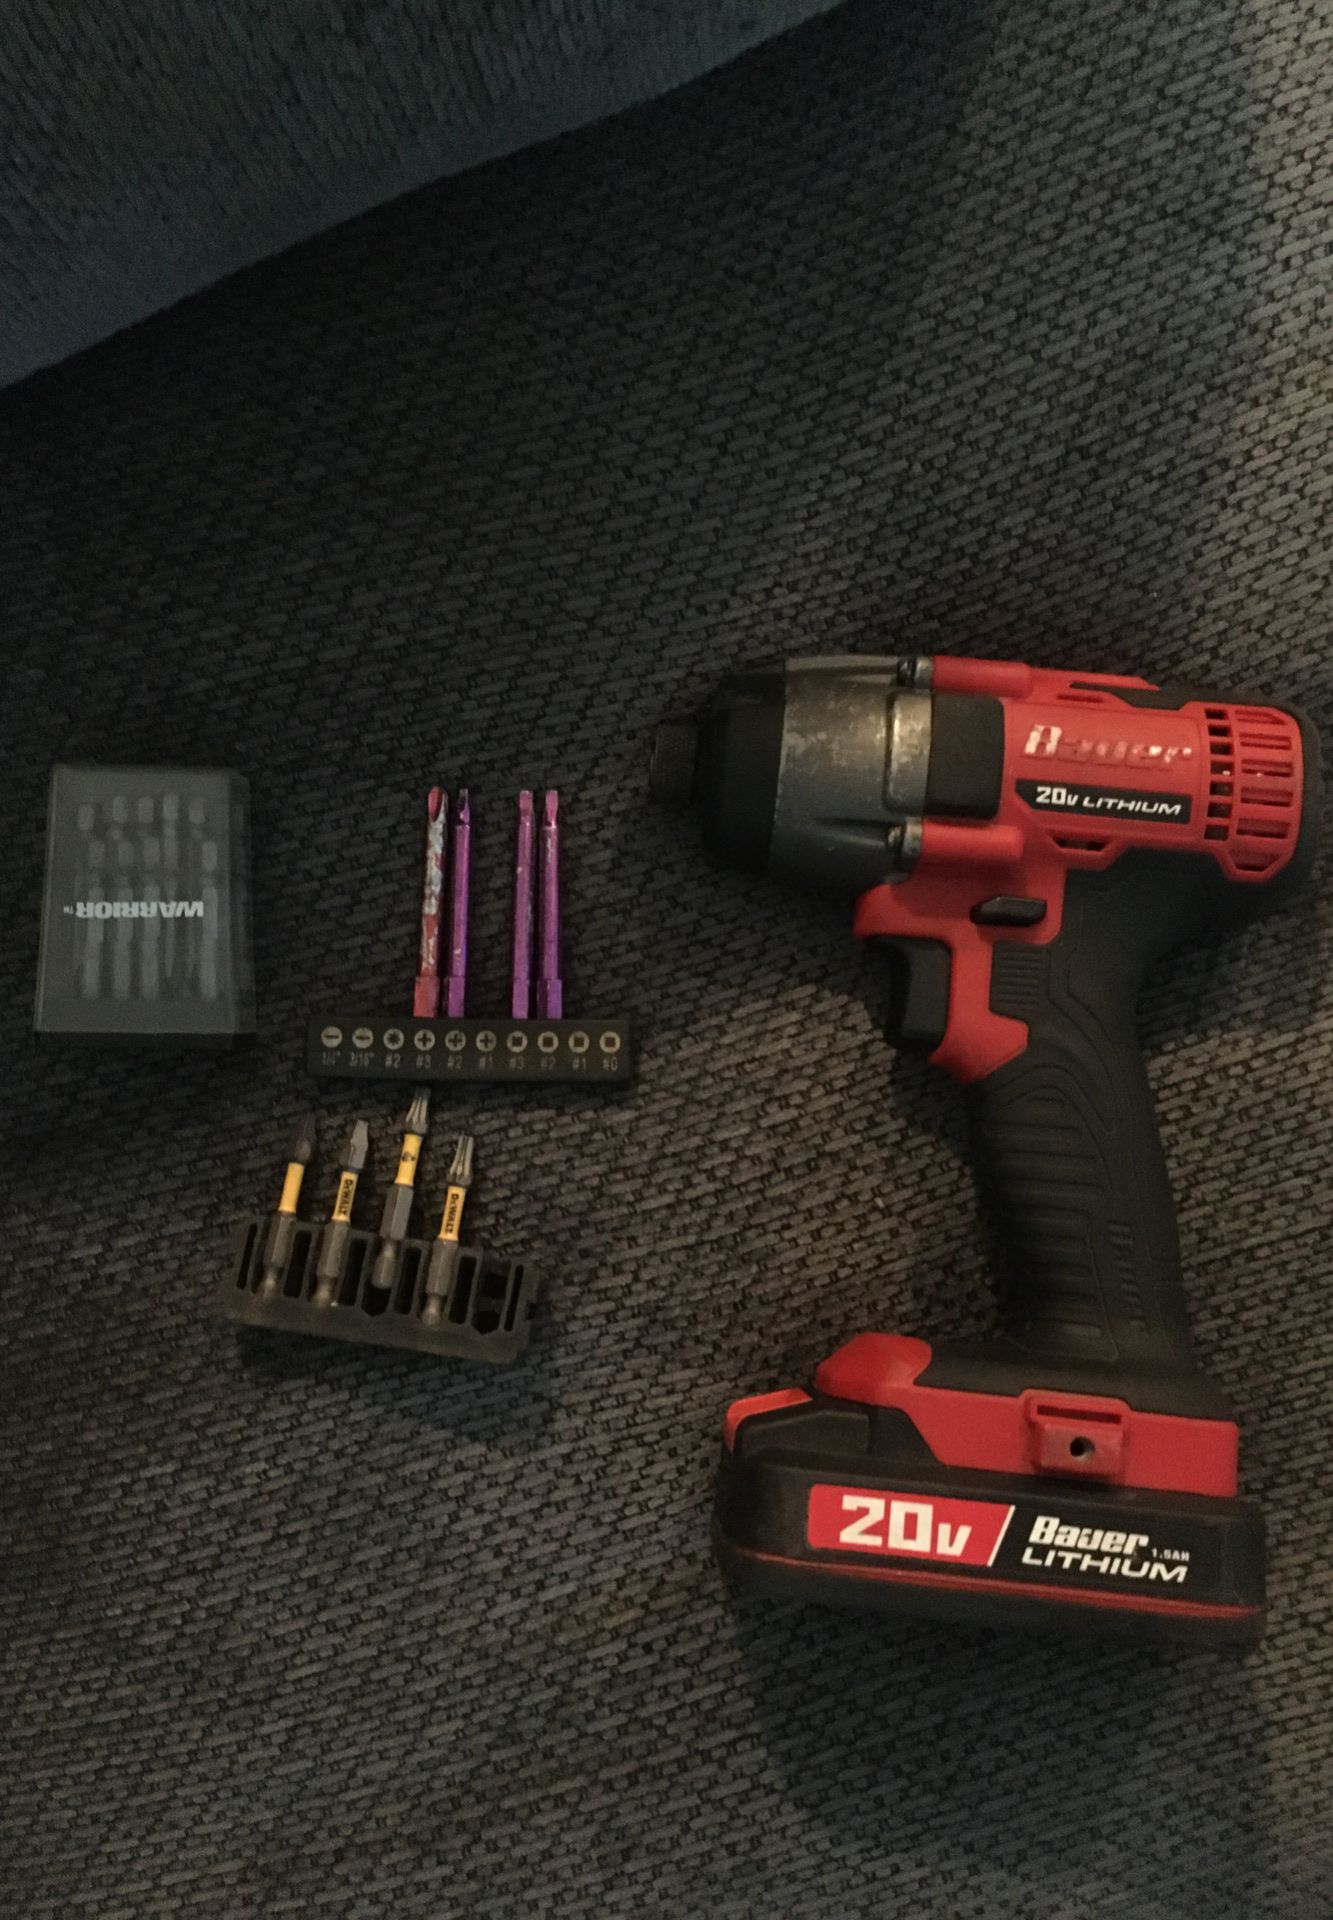 Bauer 20v lithium drill with bits